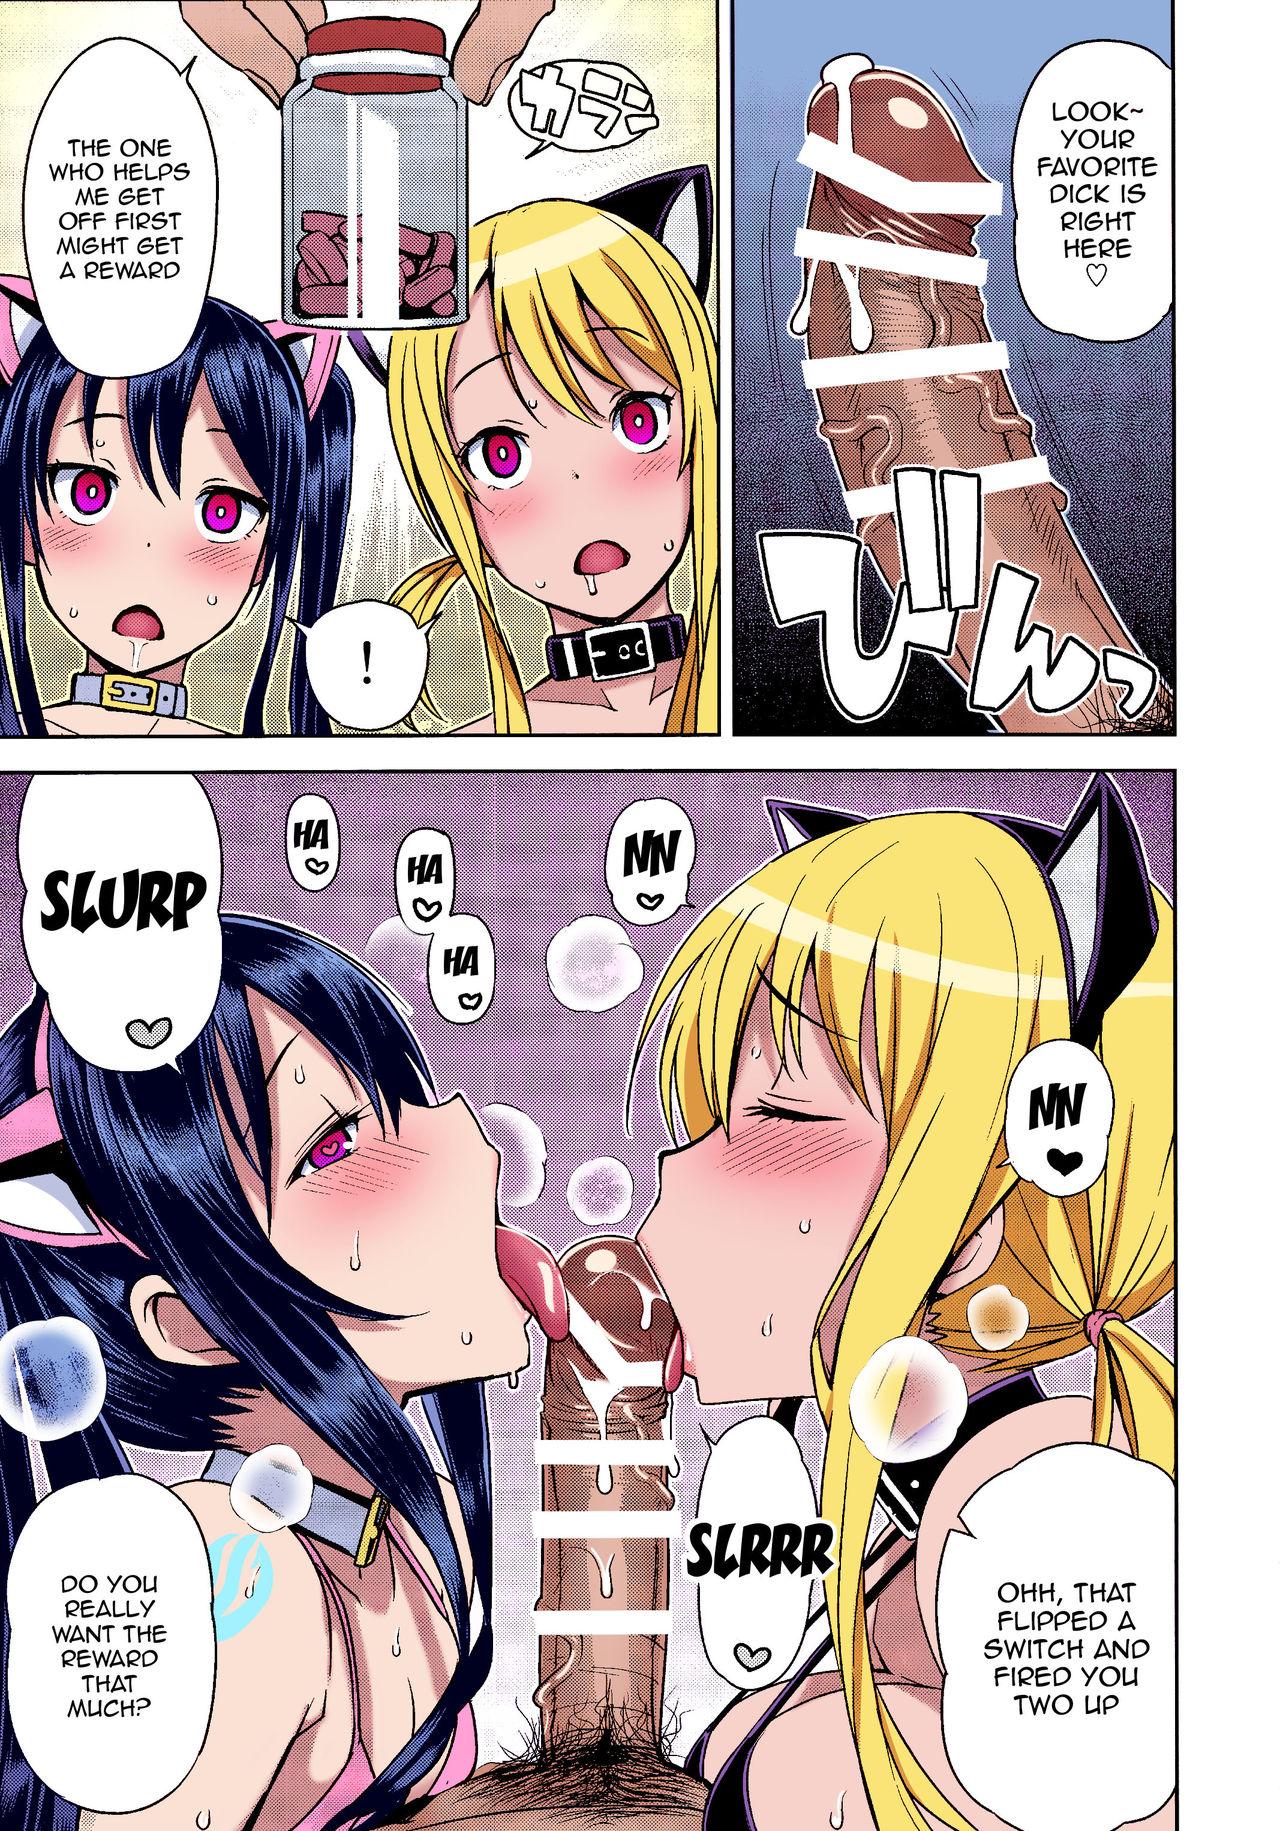 Gay Hairy Chichikko Bitch 2 - Witch Bitch Collection Vol.1 VERSION - Fairy tail Doggy Style Porn - Page 4